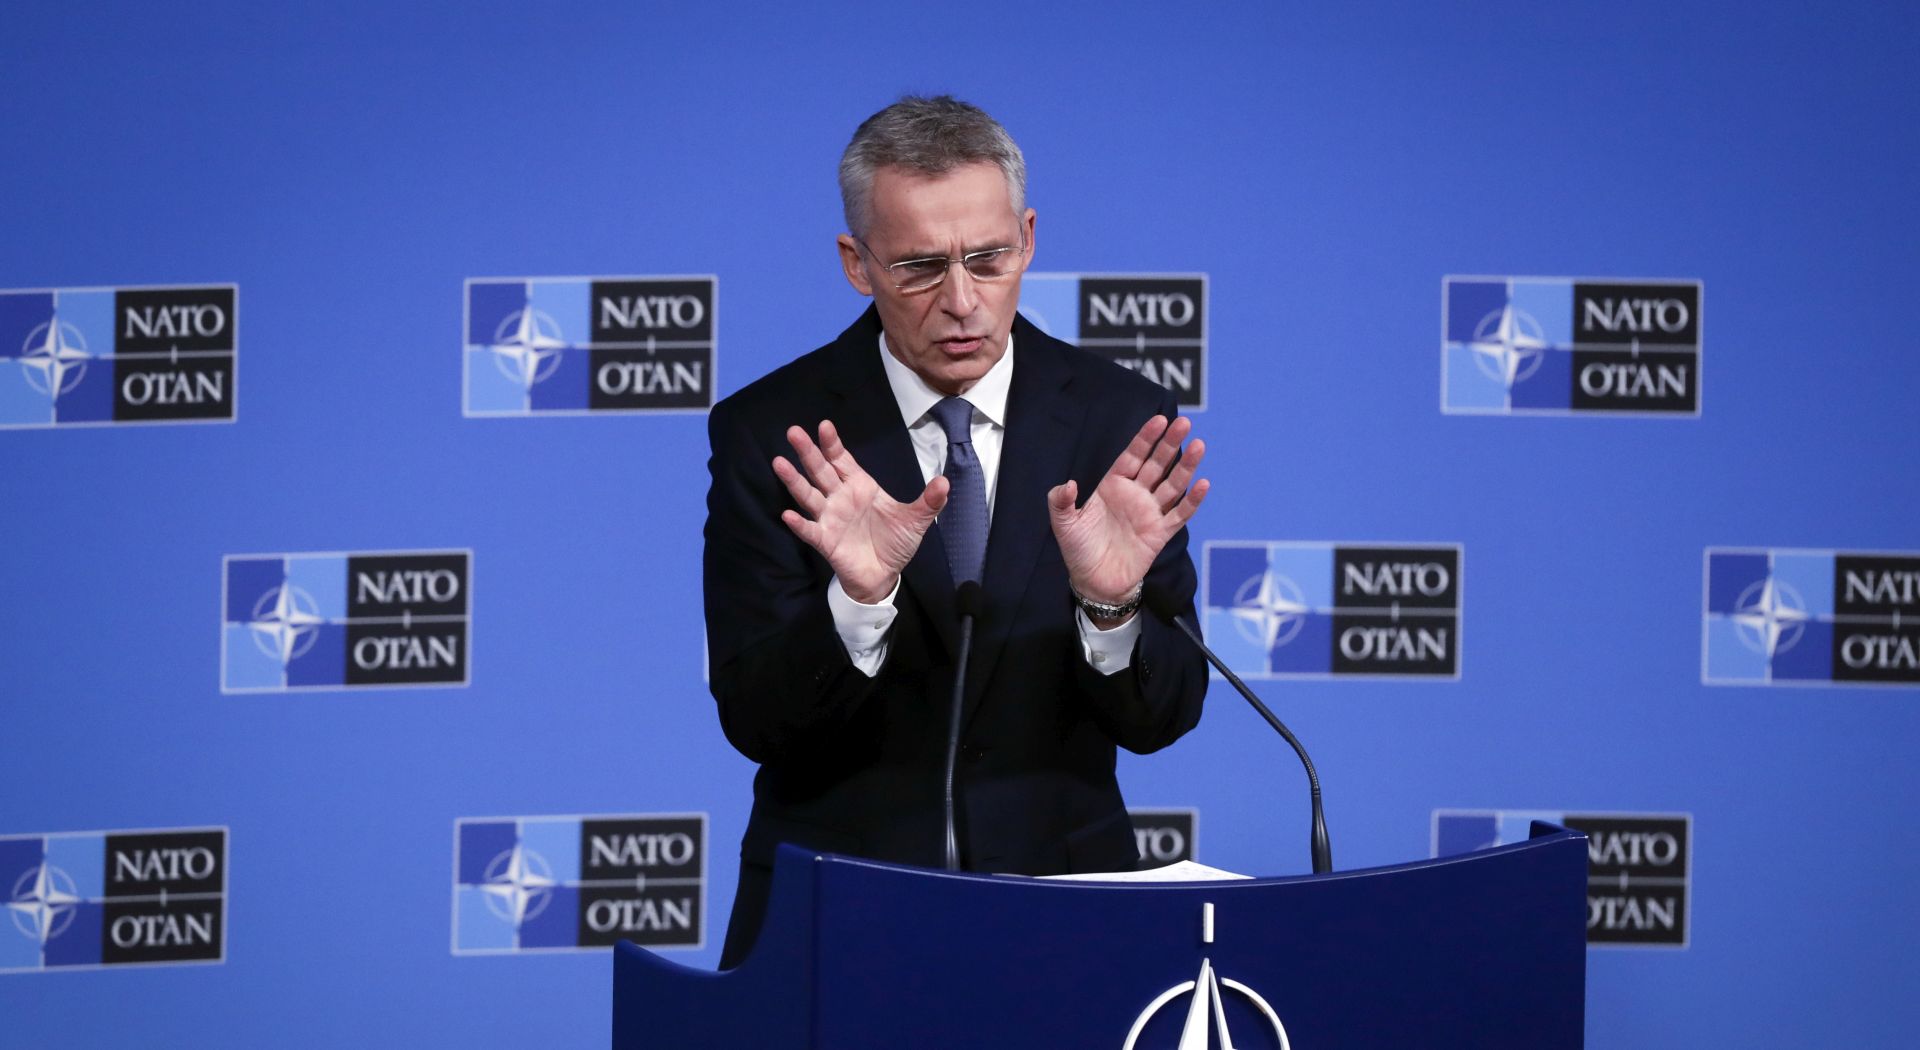 epa08007866 NATO Secretary General Jens Stoltenberg gives a press conference ahead of a NATO foreign ministers meeting in Brussels, Belgium, 23 October 2019. NATO Secretary General among other things reacts to comments of French President Emmanuel Macron saying NATO is 'brain-dead'. The Secretary General annouced a visit to meet President Macron next week.  EPA/OLIVIER HOSLET